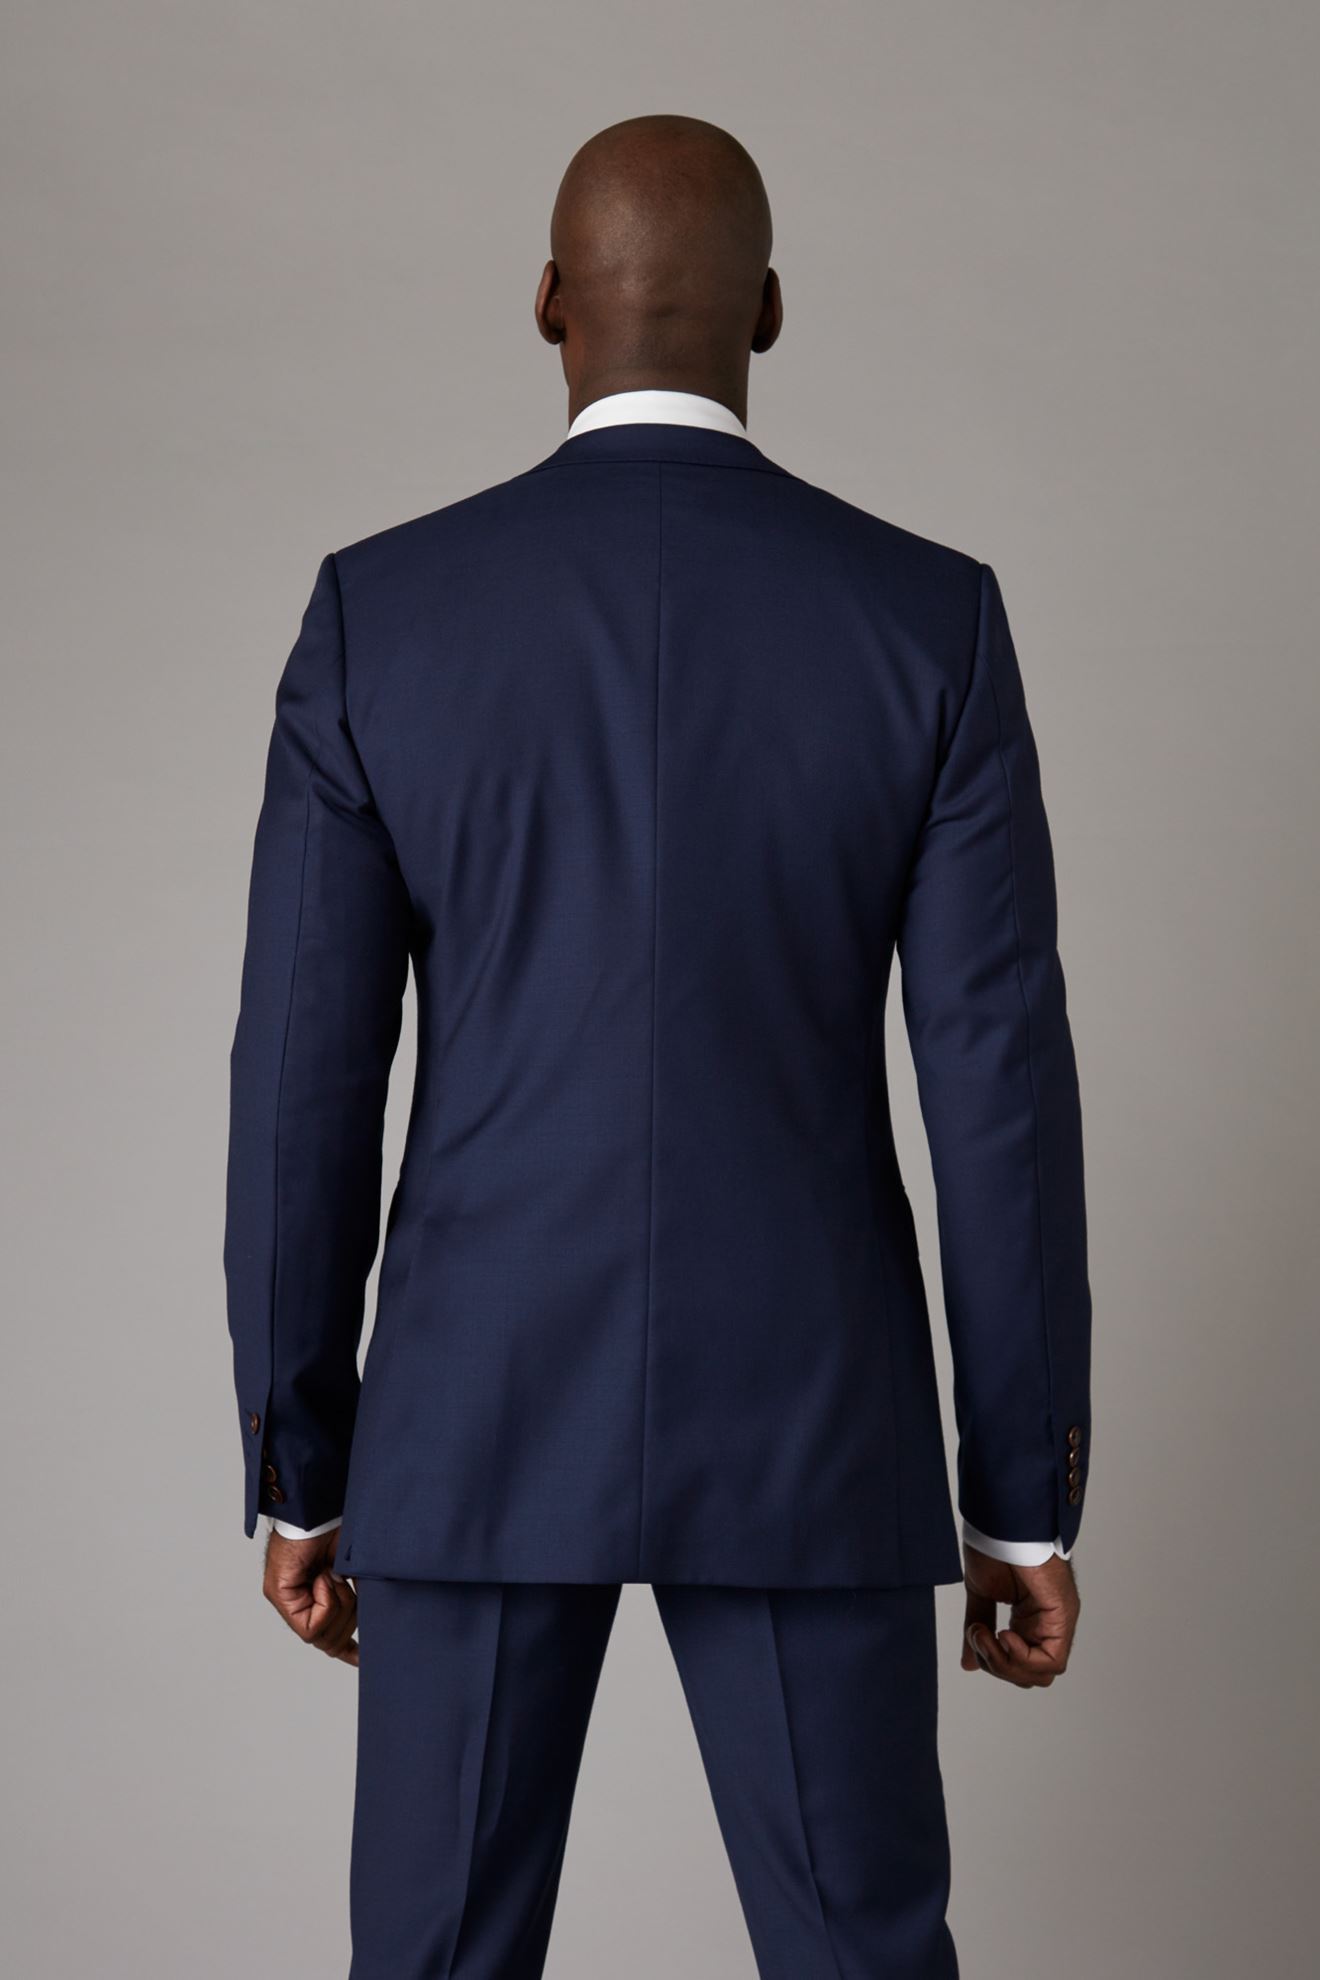 Picture of Mixed fabric navy blue and grey three-piece suit